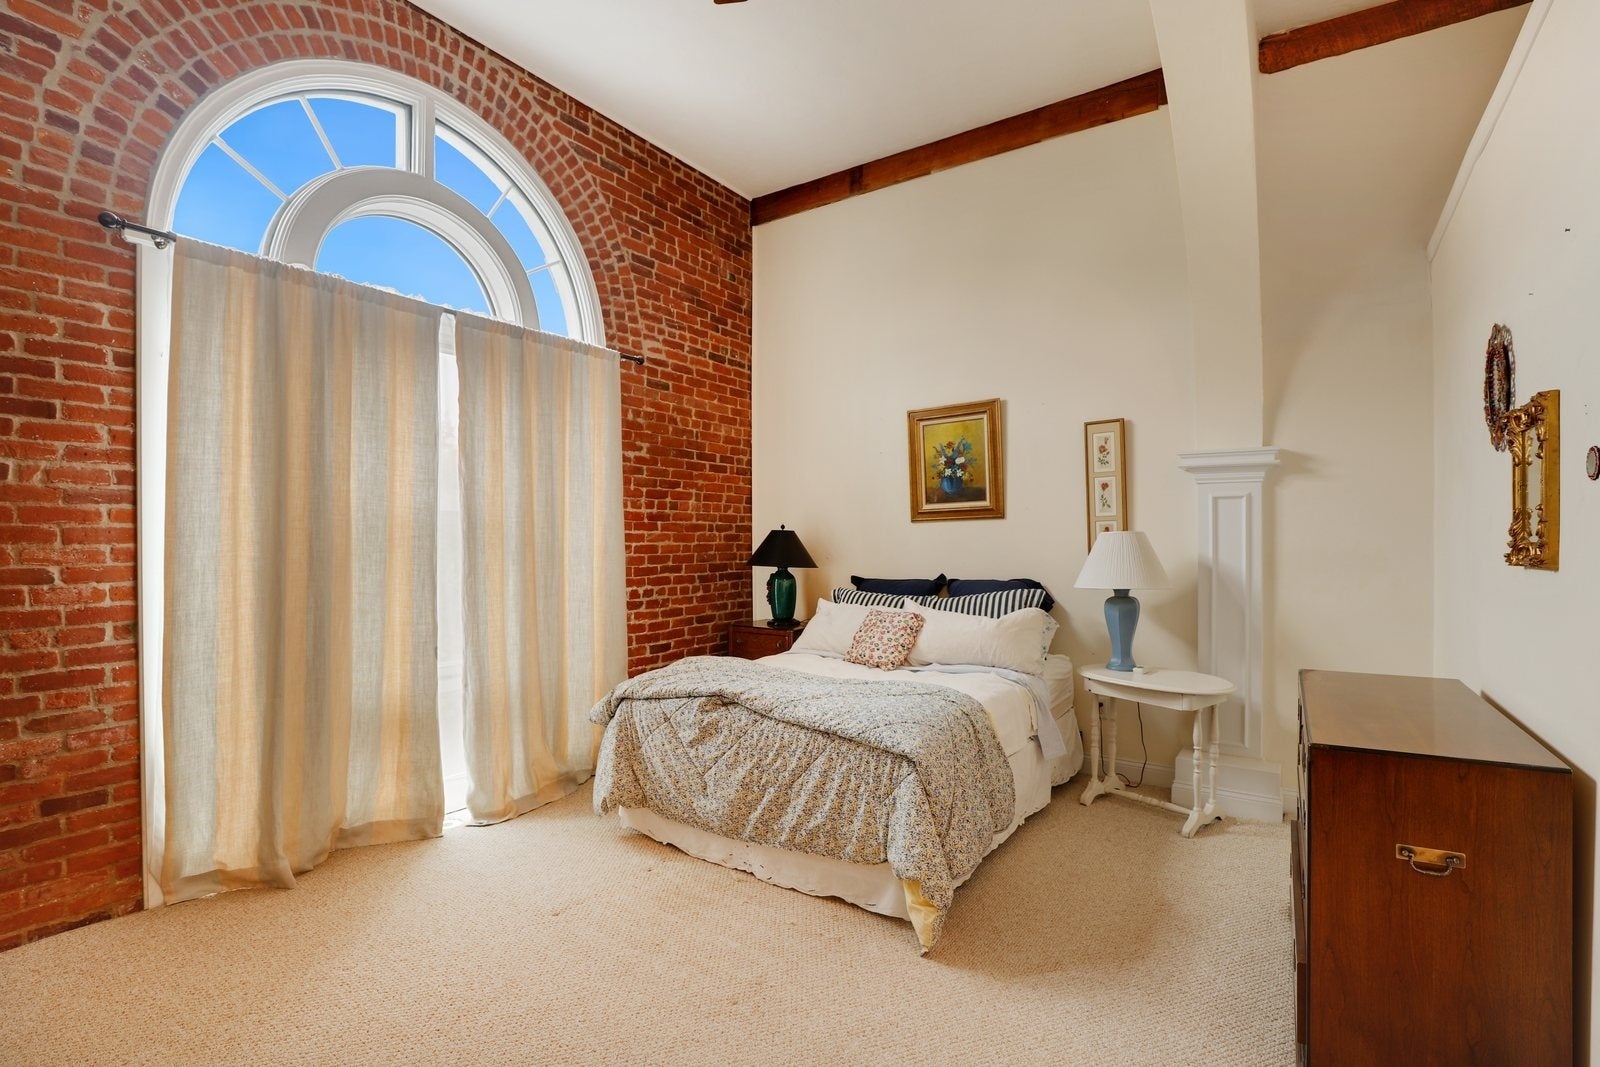 A bedroom with exposed brick, carpeting, a Palladian window, and a bed with two night stands.